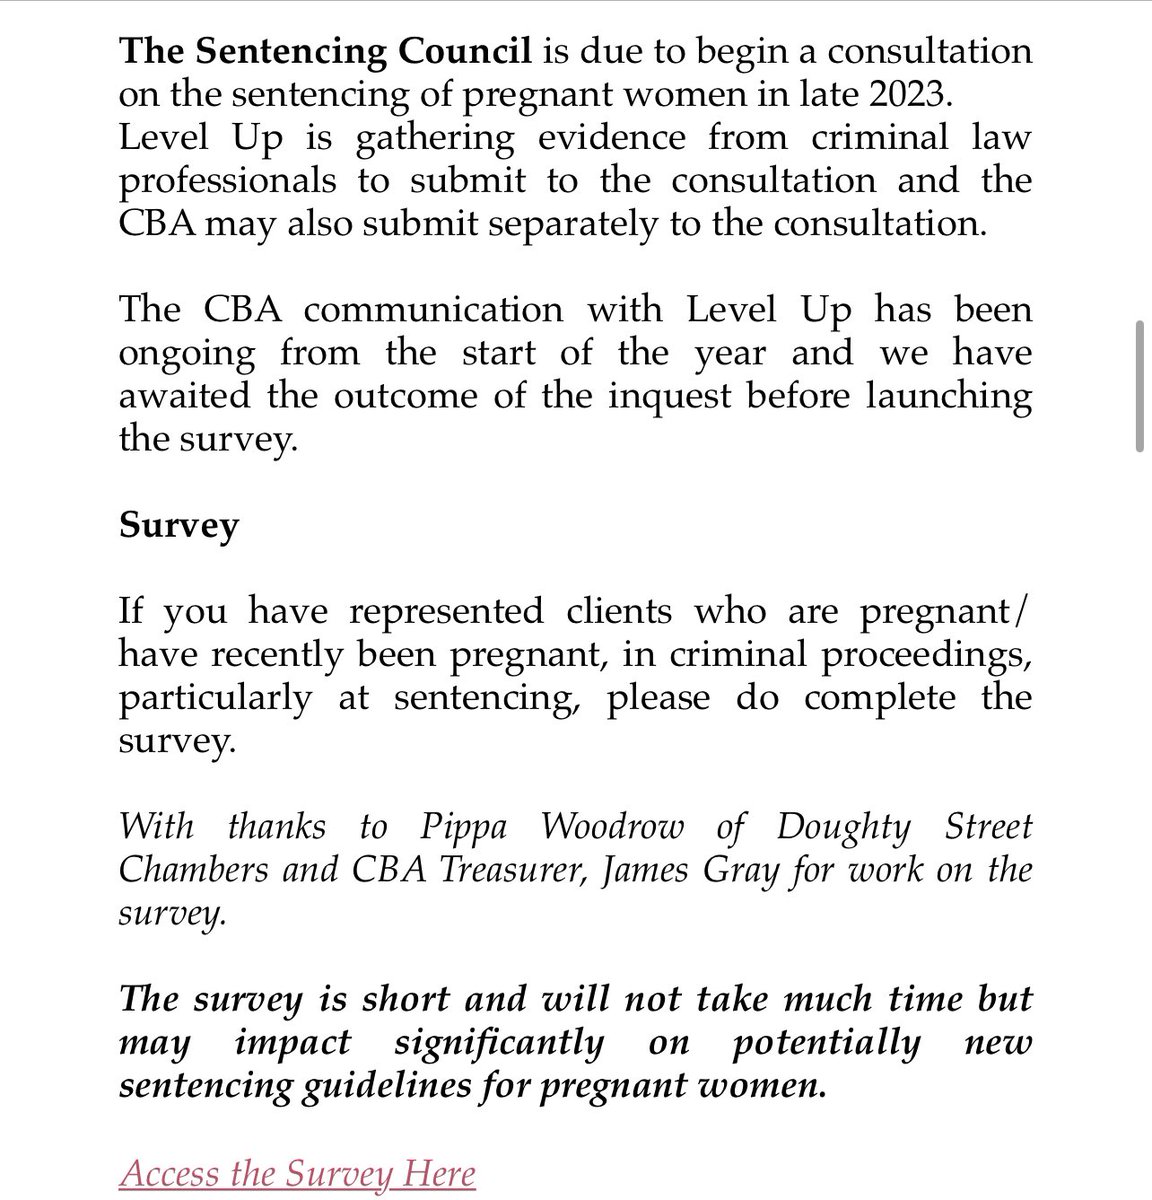 The Sentencing Council is due to begin a consultation on the sentencing of pregnant women in late 2023 If you have represented clients who are pregnant/recently pregnant, in criminal proceedings, particularly at sentencing, please do complete the survey. welevelup.org/sc-sentencing-…